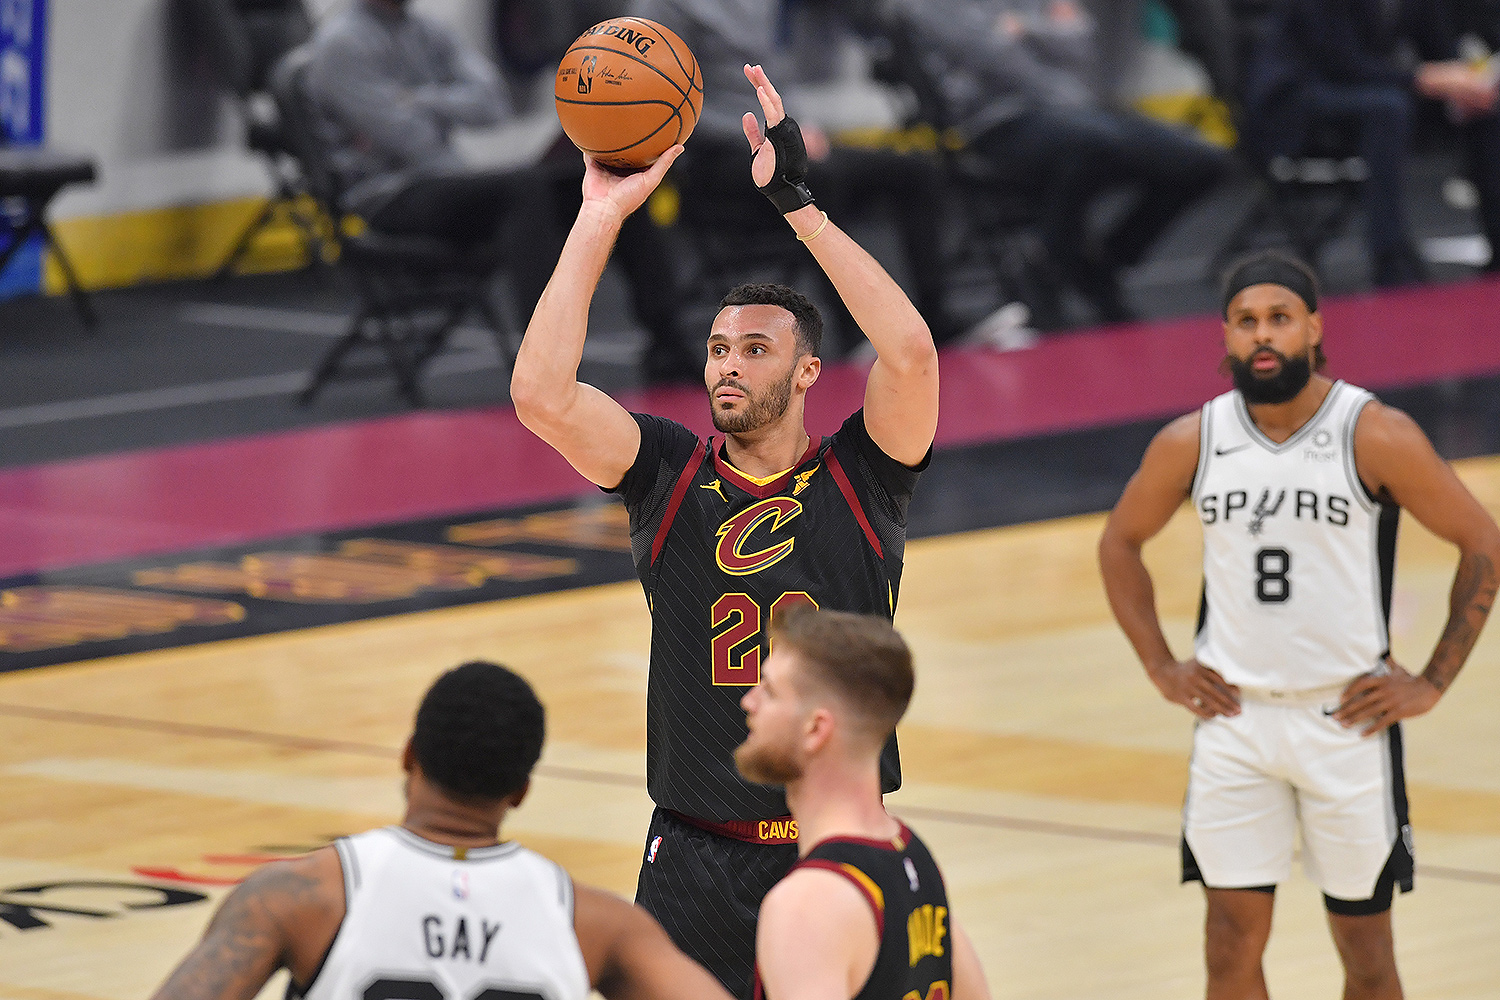 CLEVELAND, OHIO - MARCH 19: Larry Nance Jr. #22 of the Cleveland Cavaliers shoots a free throw during the second quarter against the San Antonio Spurs at Rocket Mortgage Fieldhouse on March 19, 2021 in Cleveland, Ohio. NOTE TO USER: User expressly acknowledges and agrees that, by downloading and/or using this photograph, user is consenting to the terms and conditions of the Getty Images License Agreement. (Photo by Jason Miller/Getty Images)